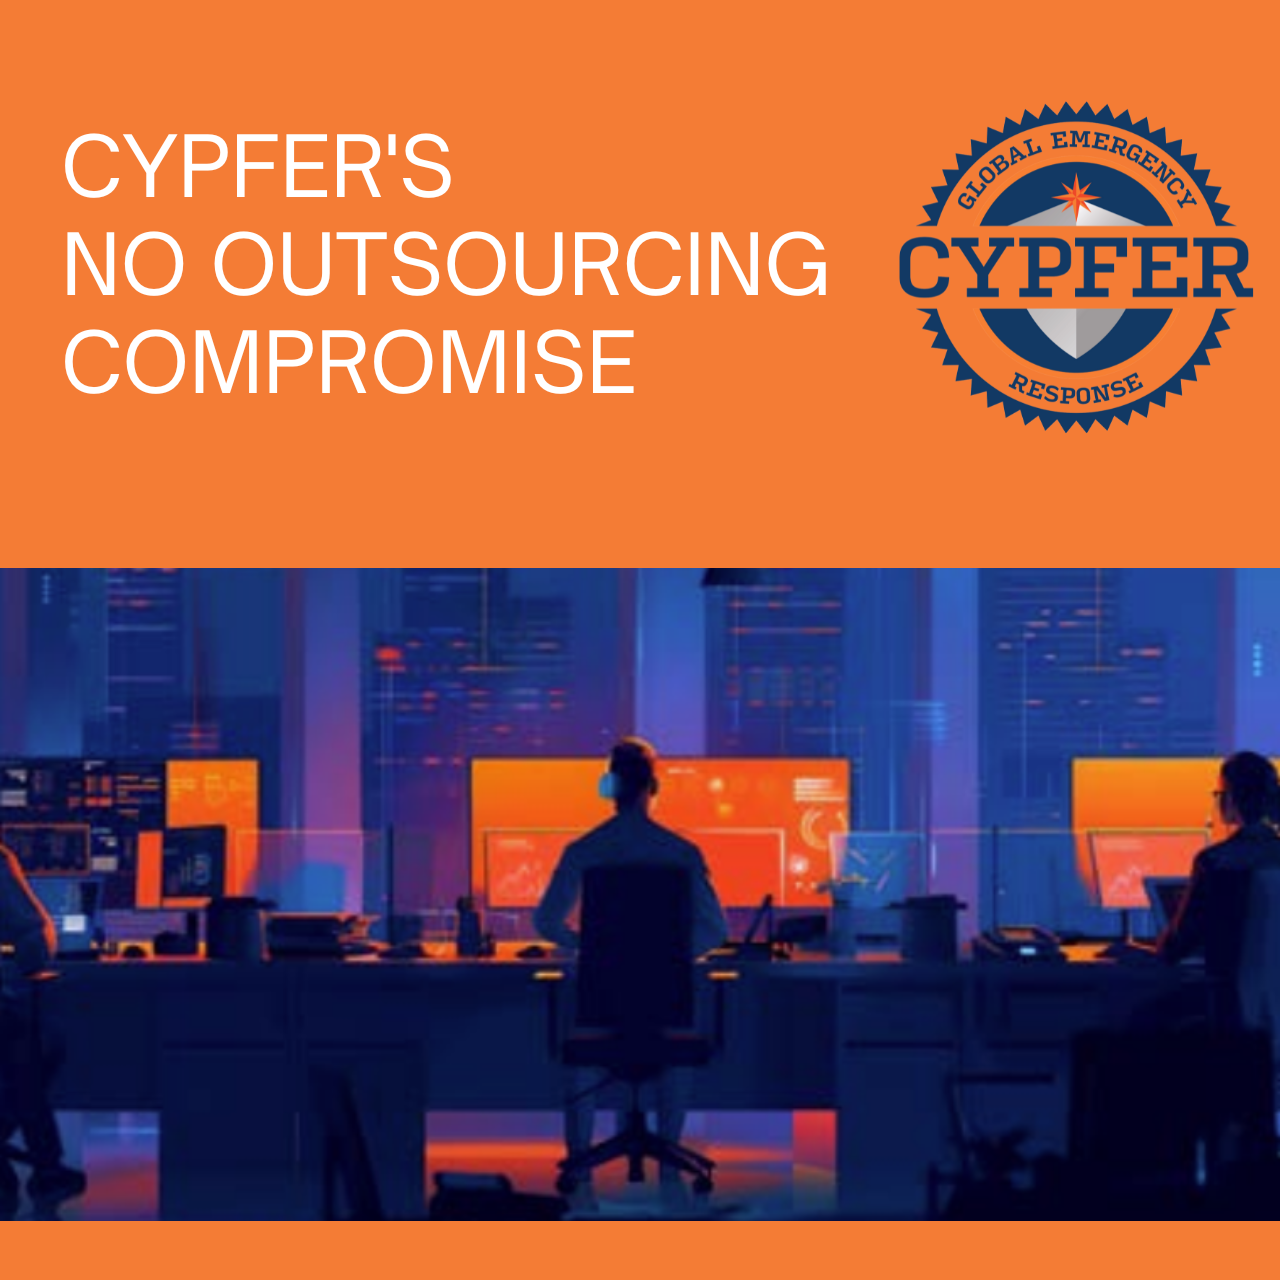 CYPFER's bold commitment to no outsourcing